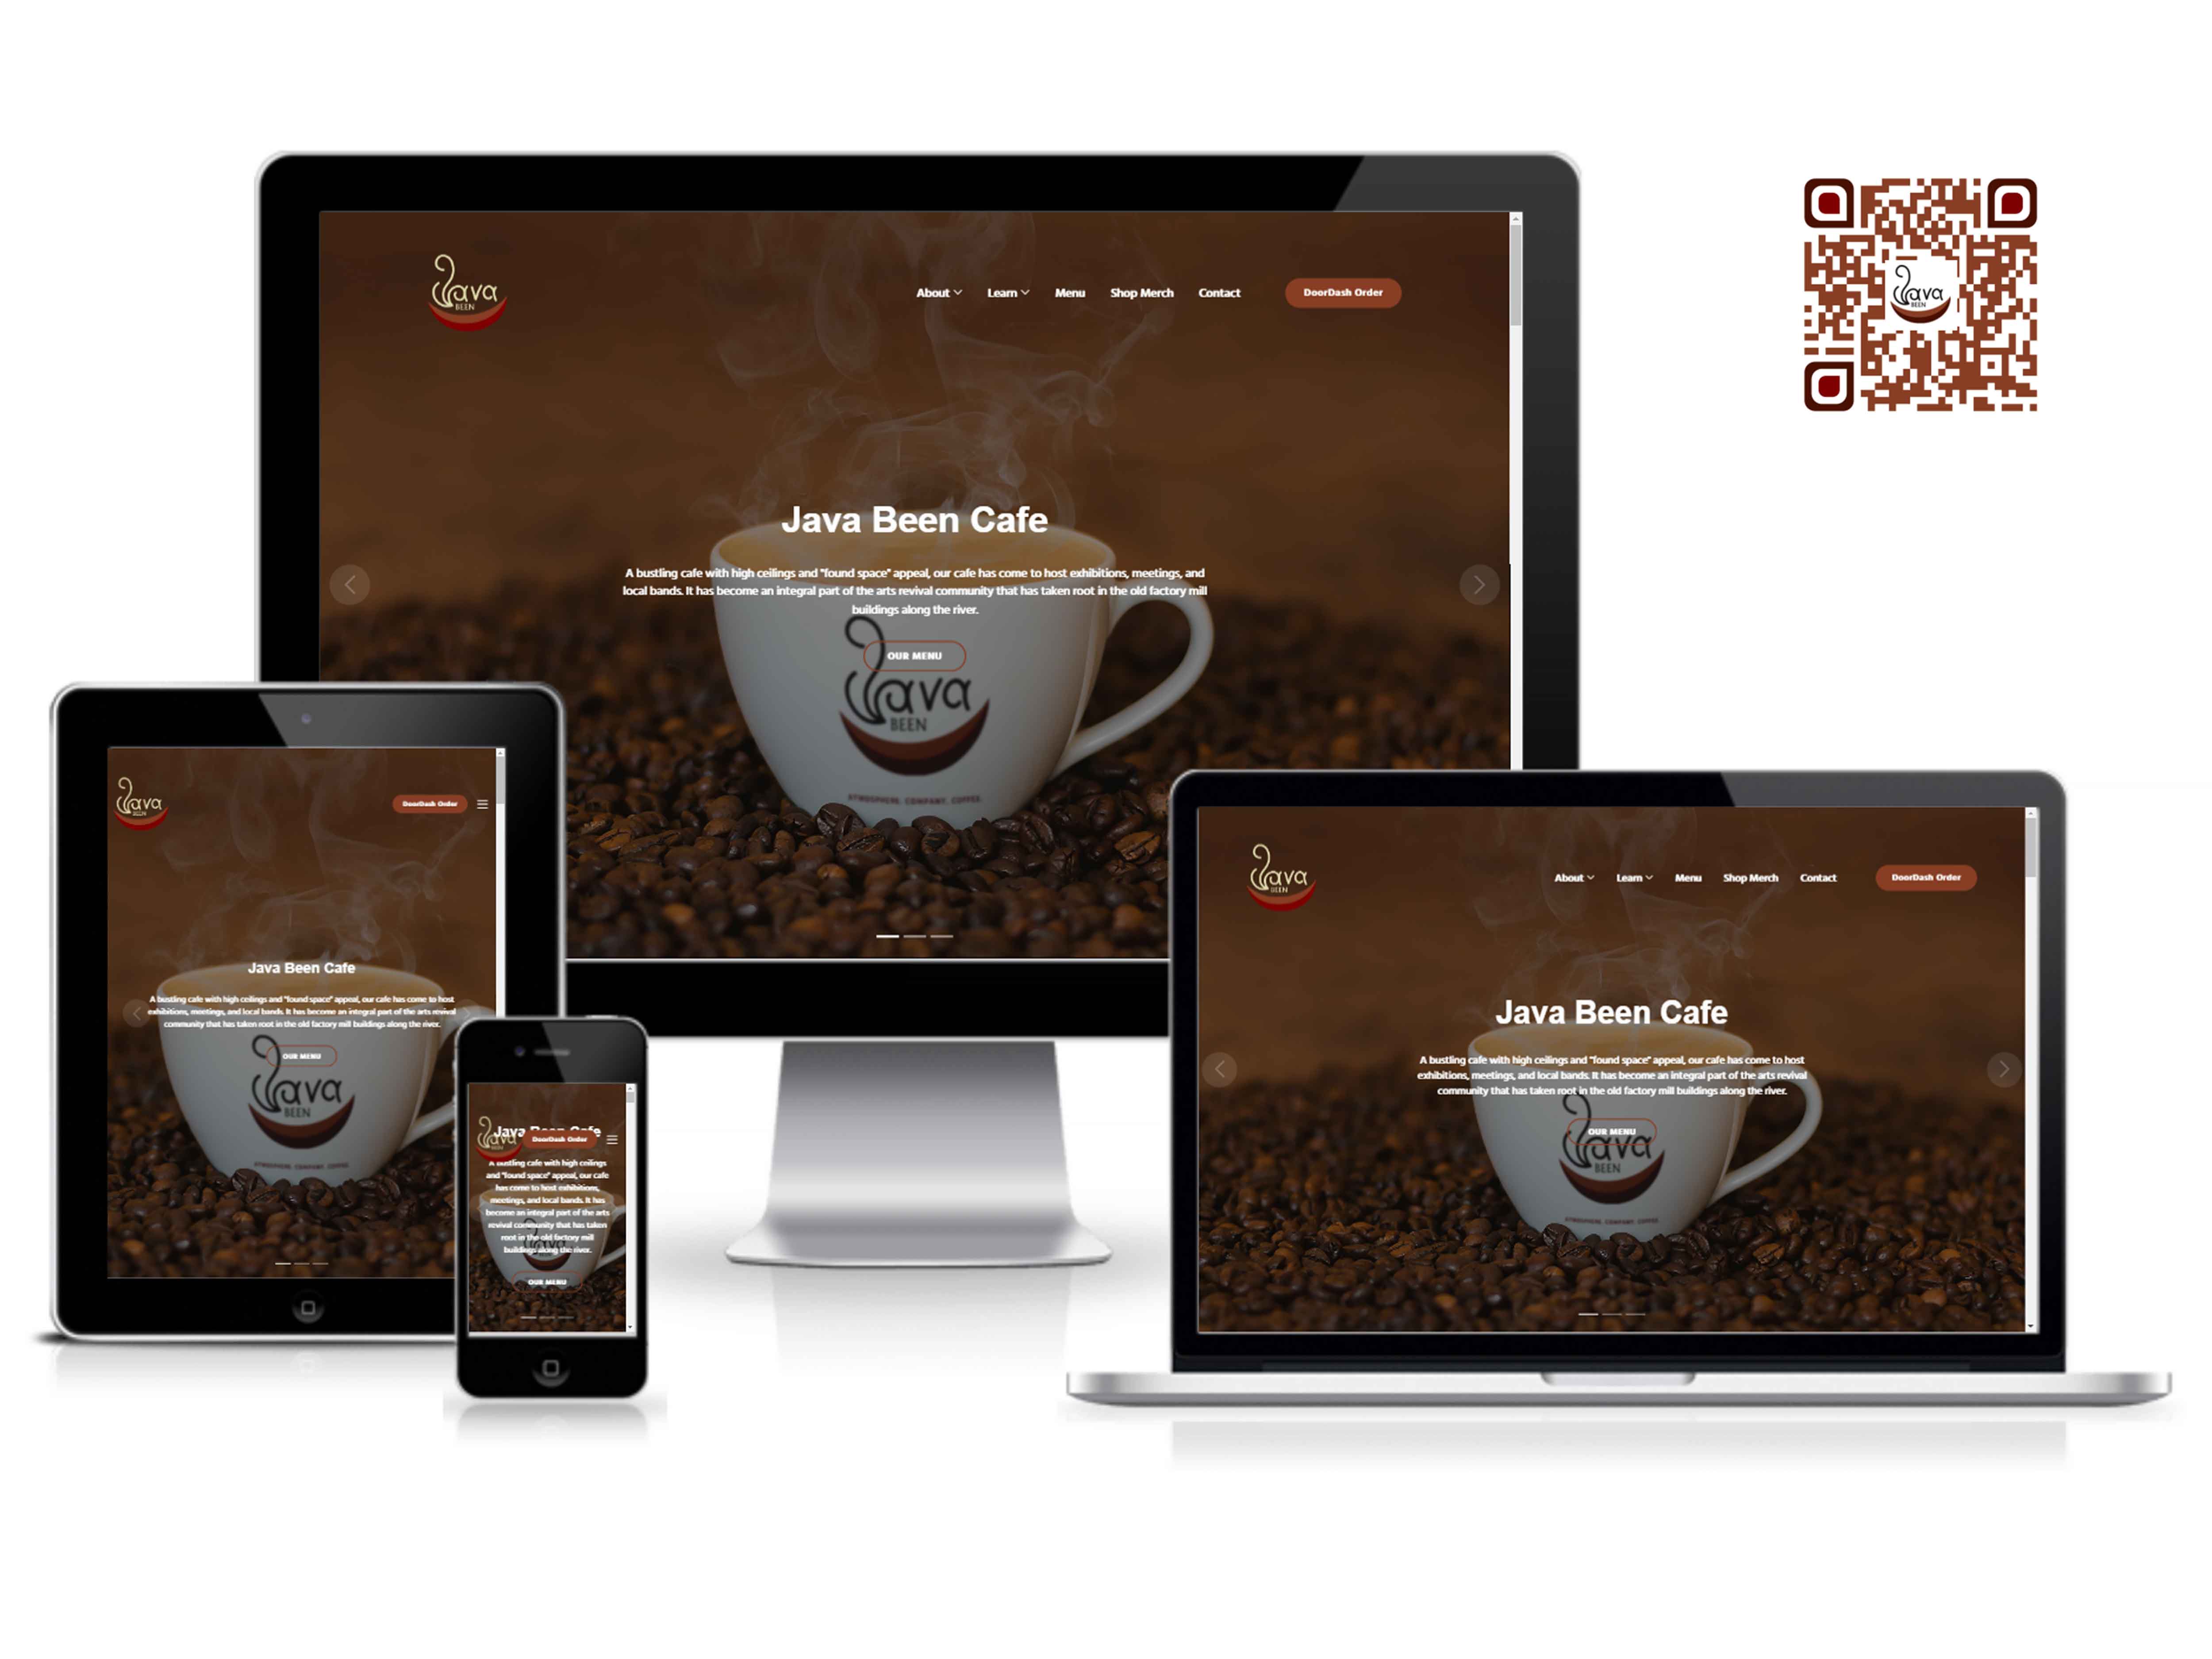 Java Been's Website wireframe and mockup